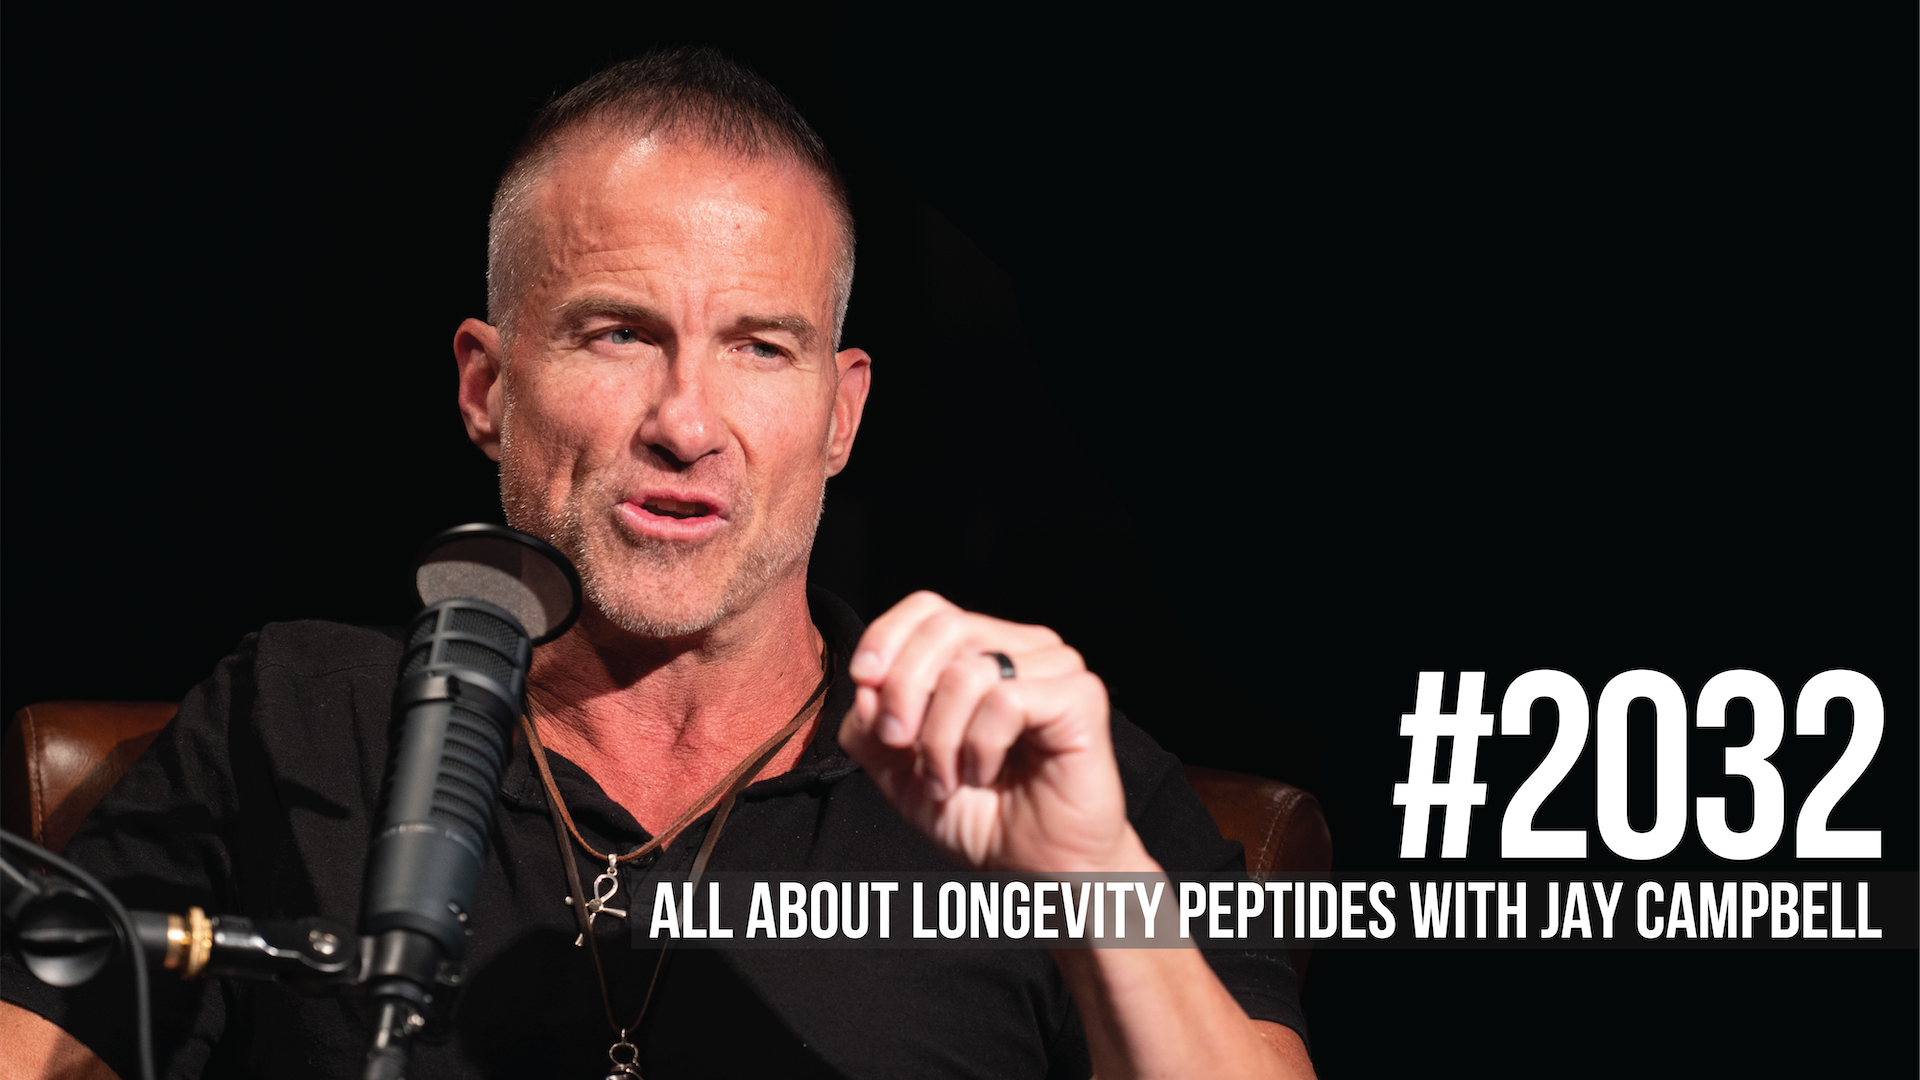 2032: Can You Reverse Aging & Live Longer? All About Longevity Peptides Jay Campbell